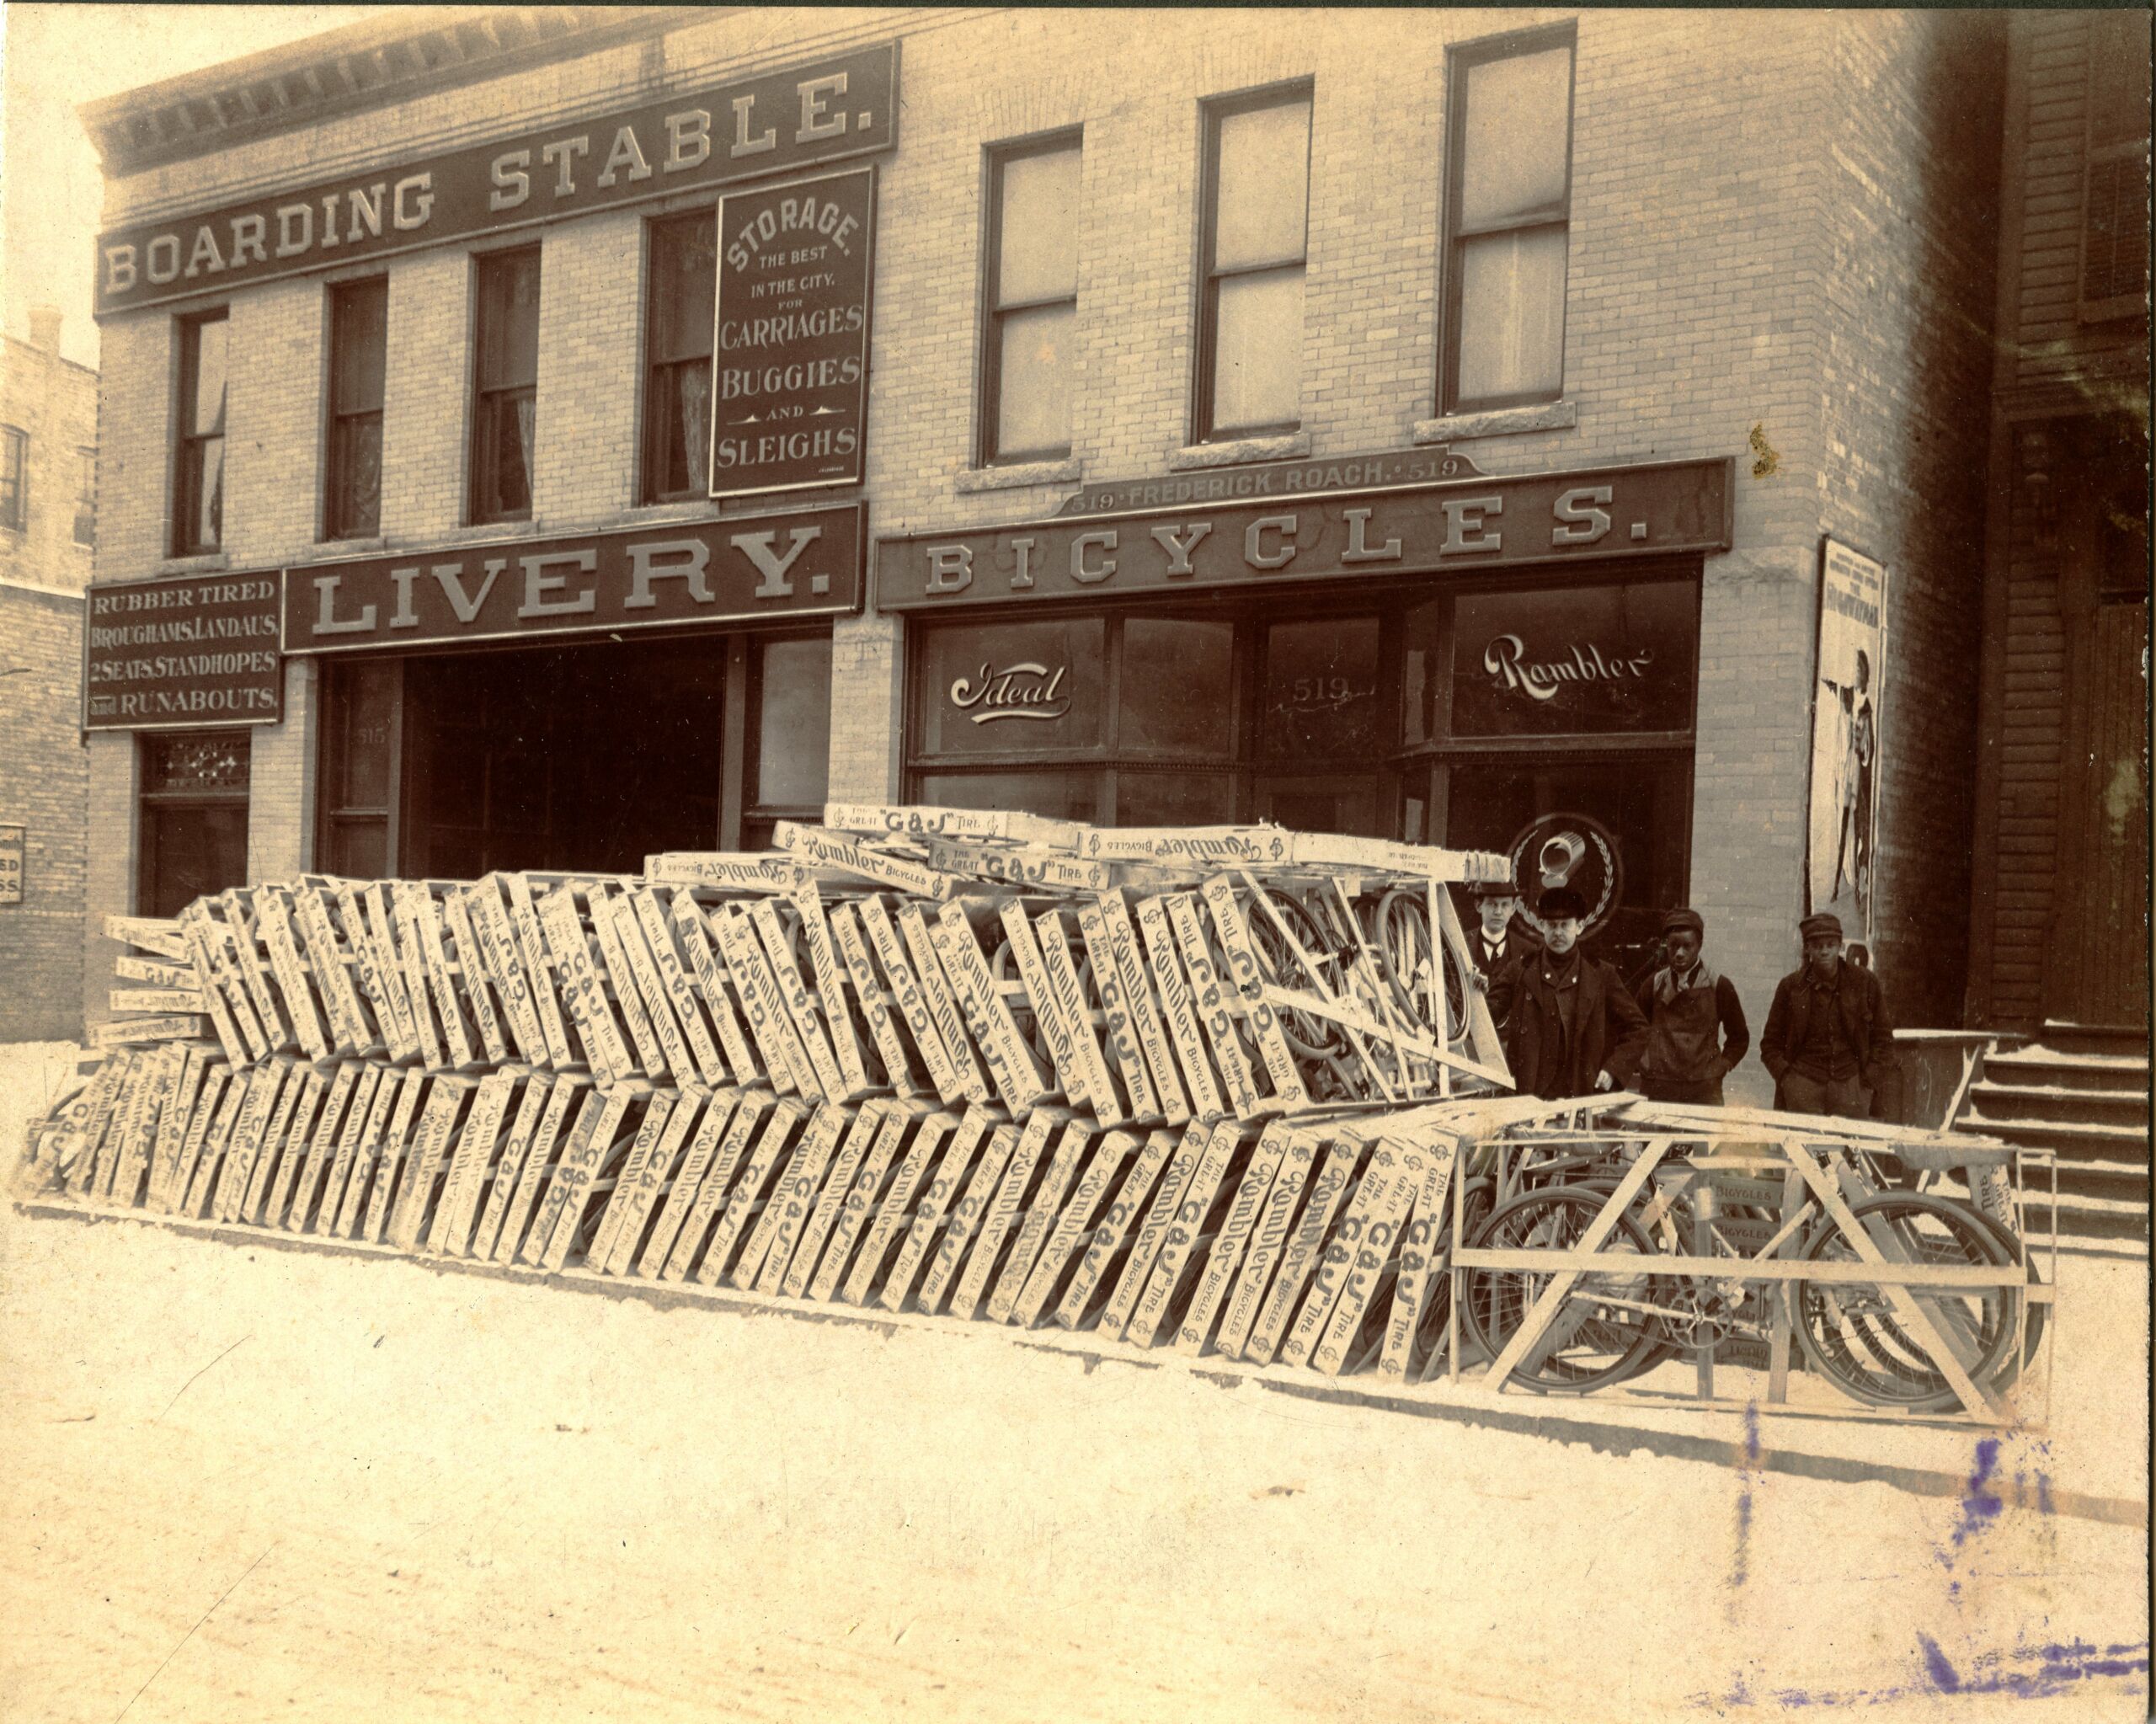 Frederick Roach Bike shop exterior and bicycles in crates. 4 people in photo.